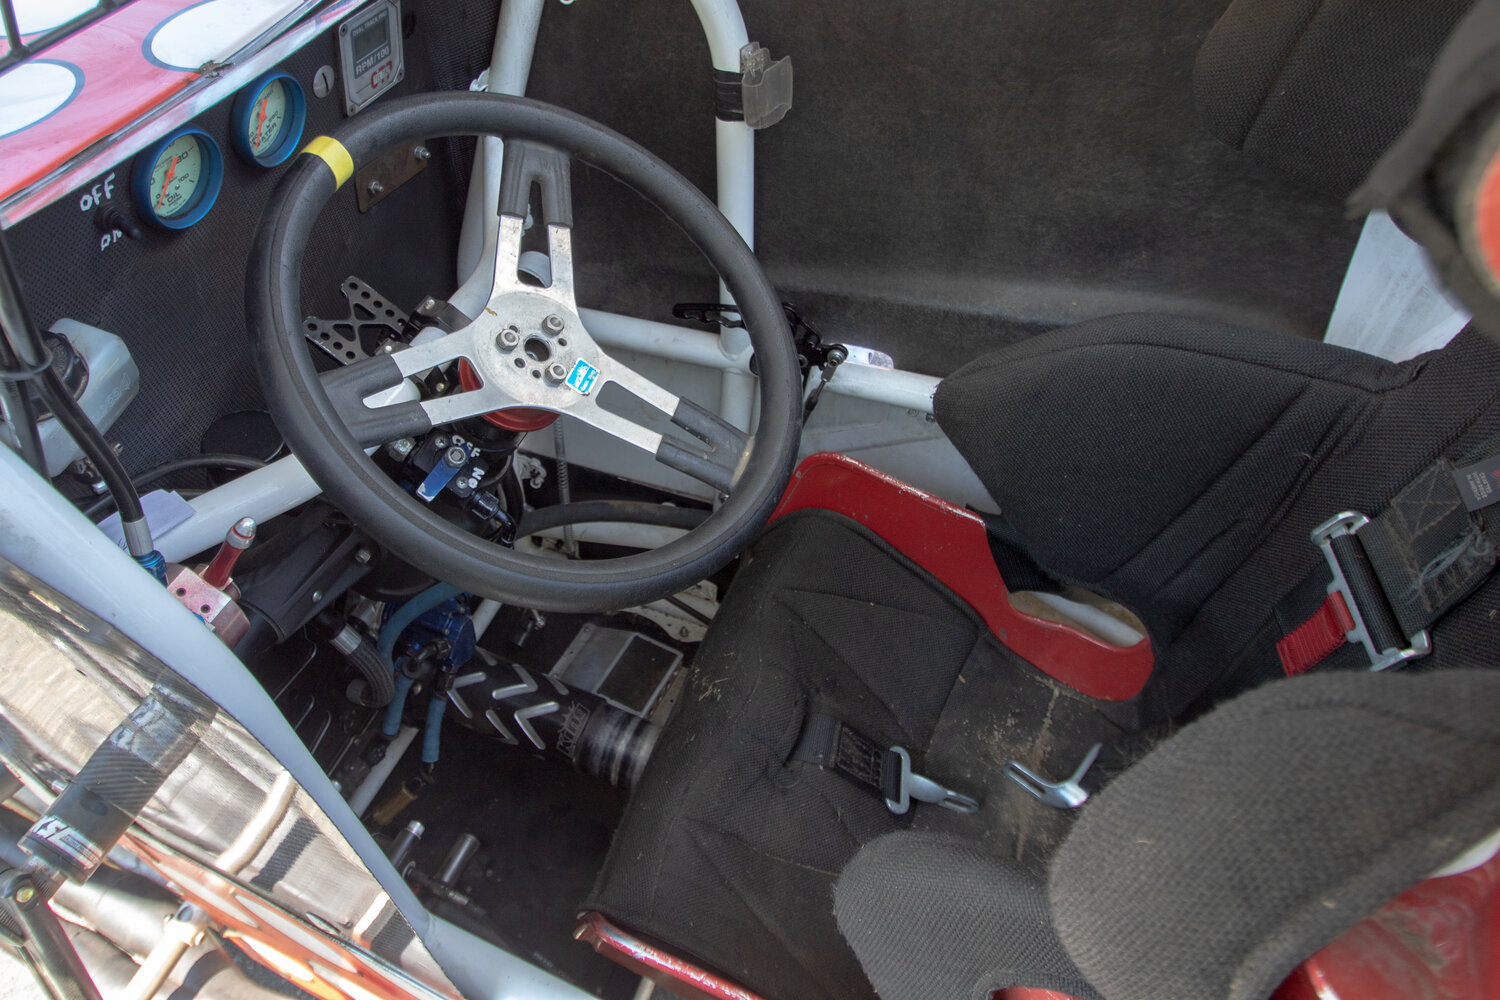 Although owner Chris Greene claimed it was roomy in the driver's seat of his sprint car, the racecar's drive shaft can be seen directly between where the driver's legs would be.